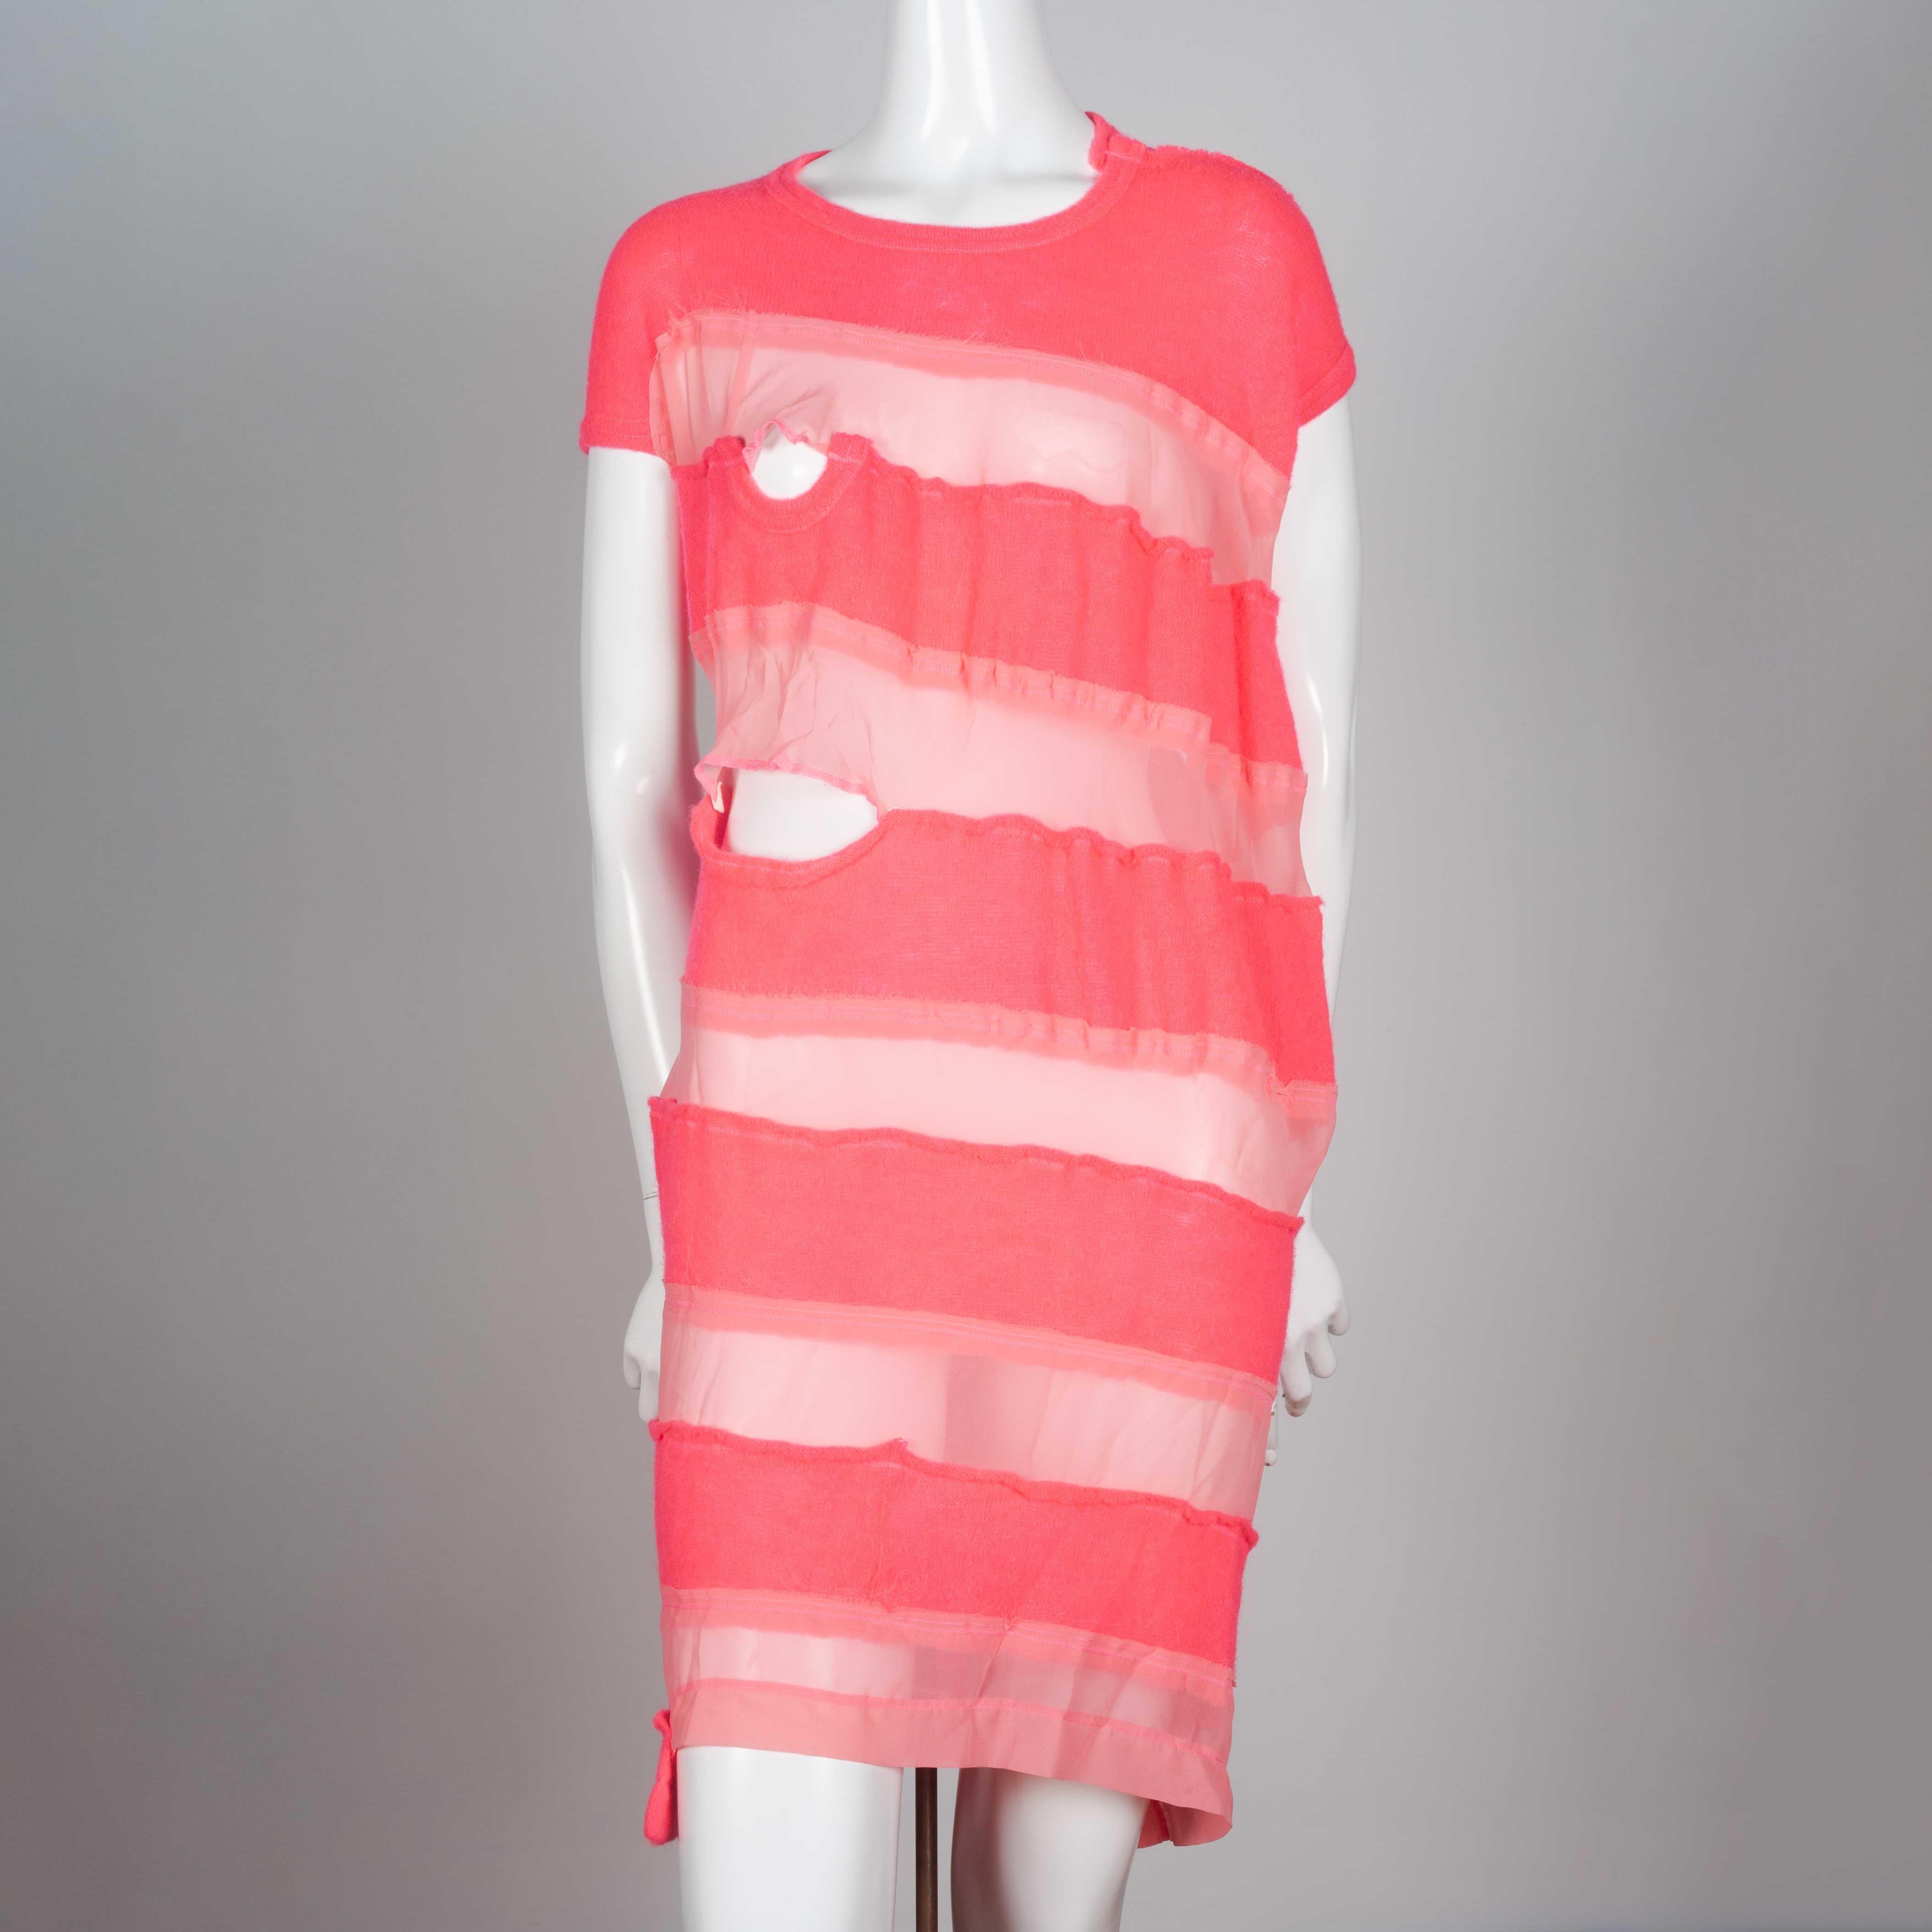 Comme des Garçons Tricot 2013, a neon pink sweater dress with alternating sheer horizontal strips. Asymmetric cut and design imbedded holes in an avant-garde mood. 

YEAR: 2013
MARKED SIZE: M
US WOMEN'S: S
US MEN'S: XS
FIT: Regular
CHEST: 17